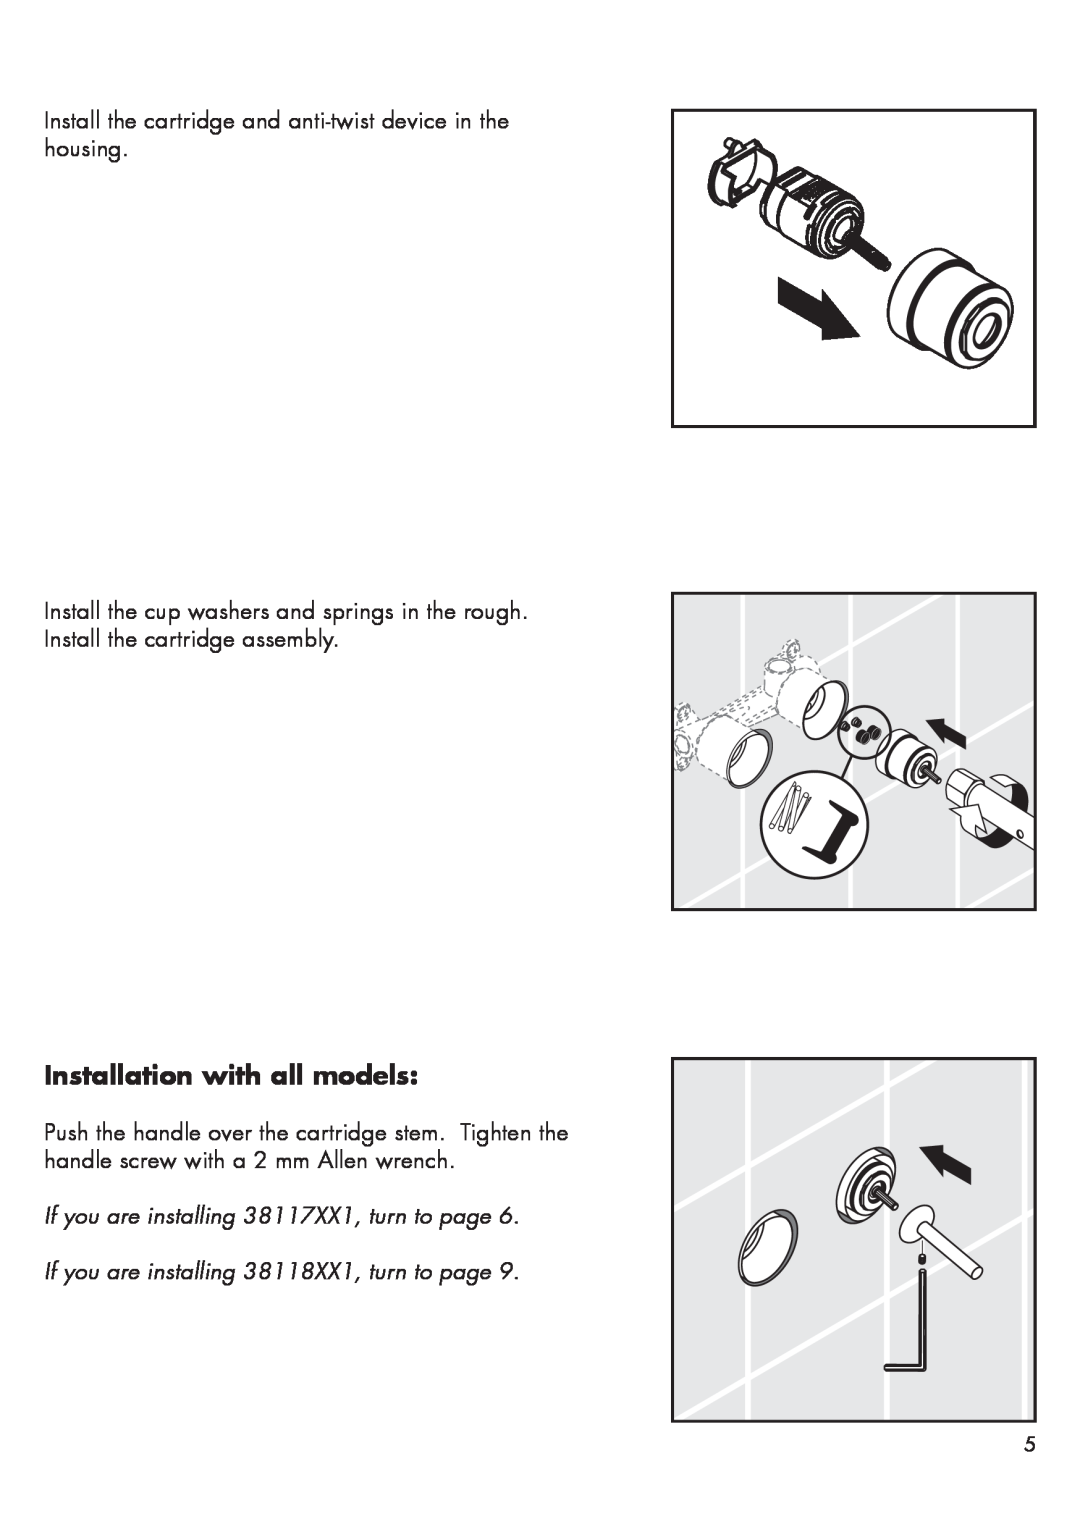 Hans Grohe 38118XX1 installation instructions Installation with all models, If you are installing 38117XX1, turn to page 